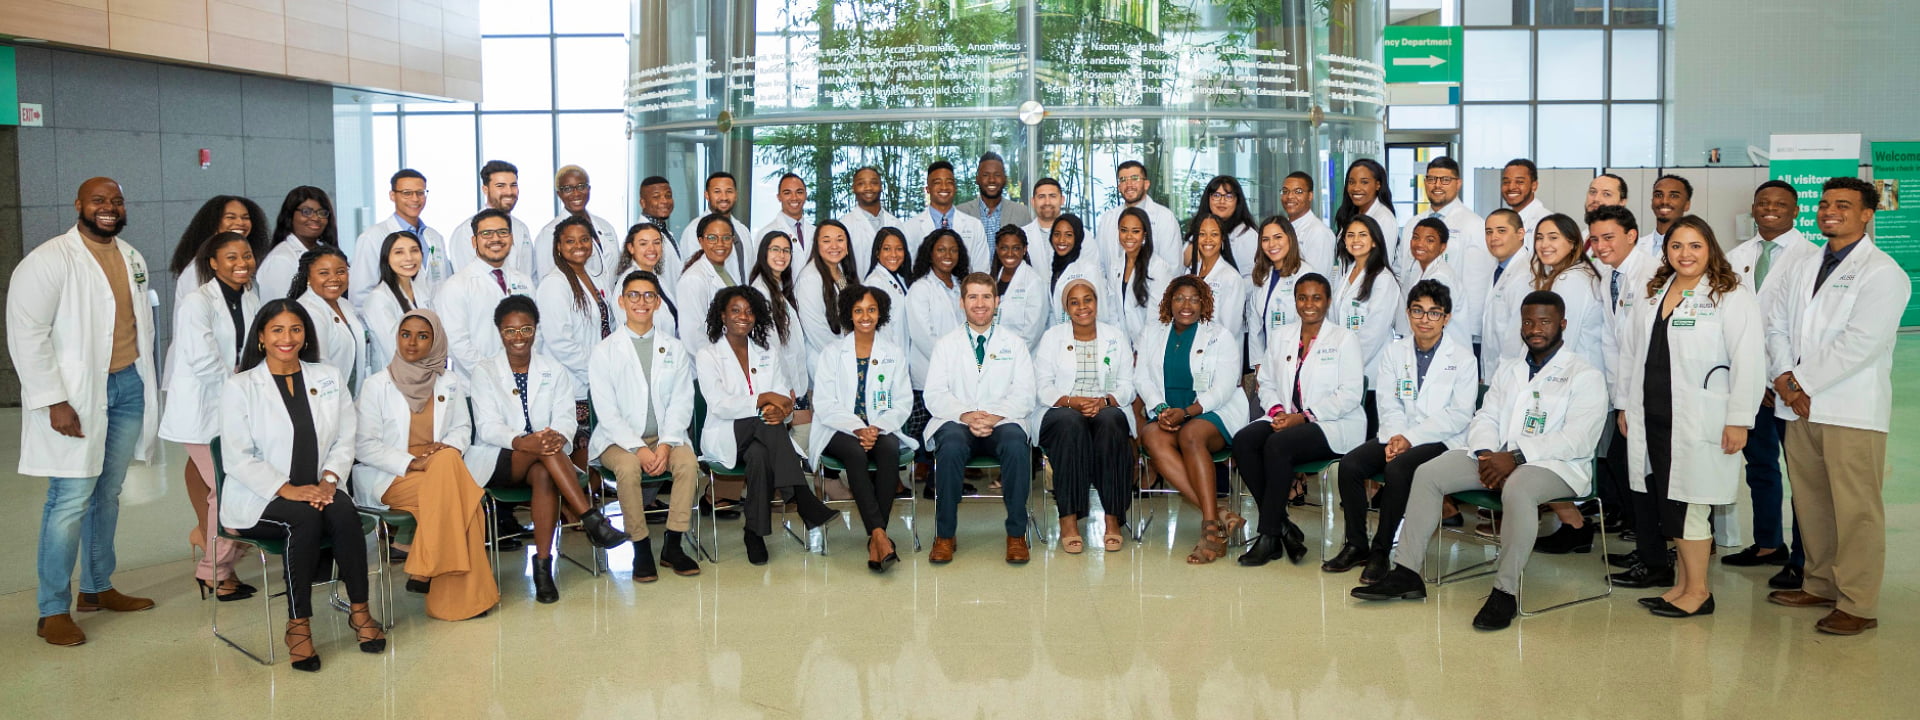 A large group of Rush medical students and faculty